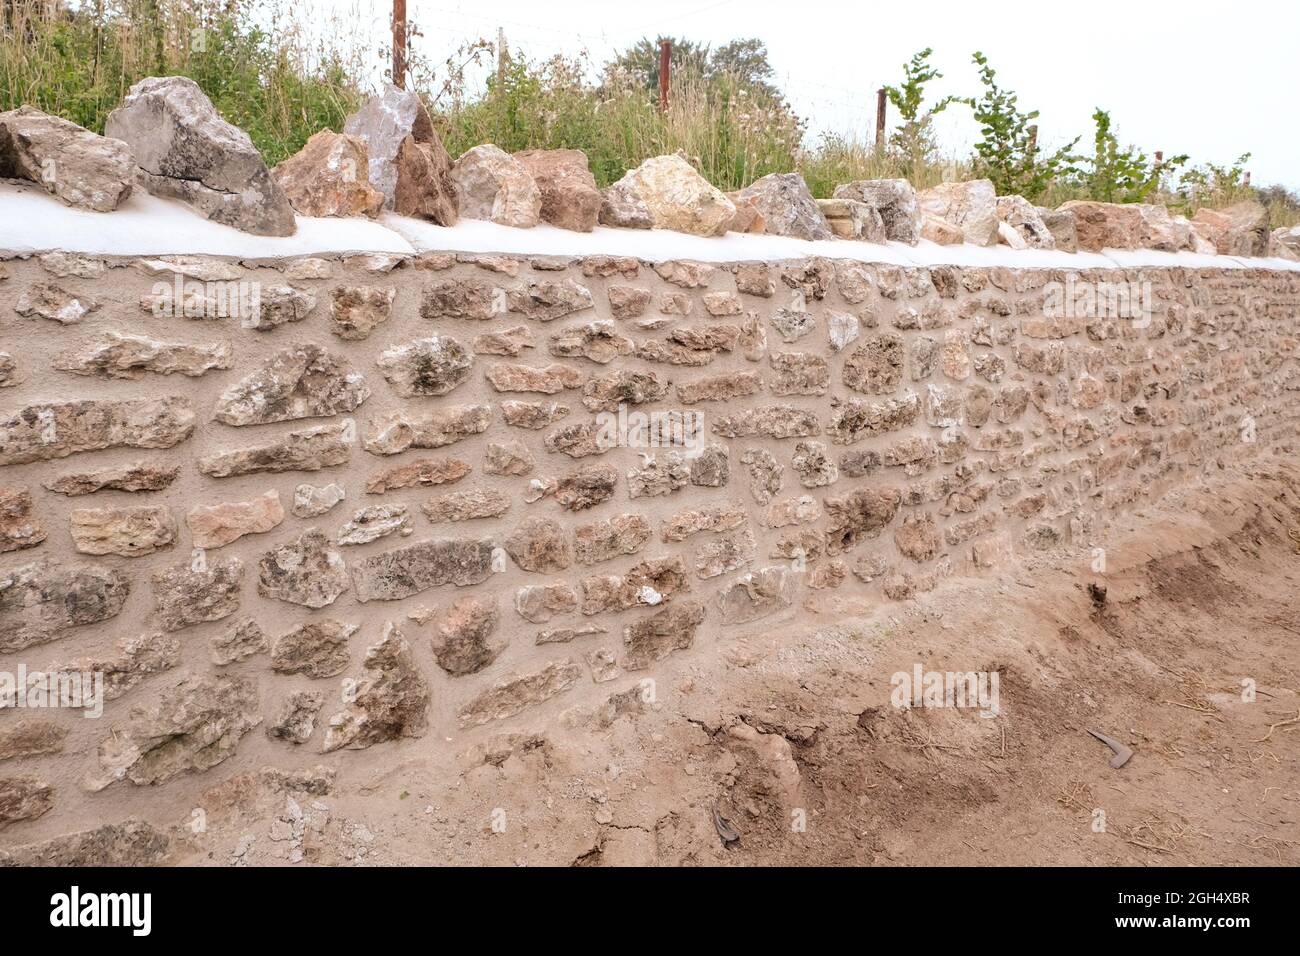 September 2021 - New stone wall being built in a traditional style Stock Photo